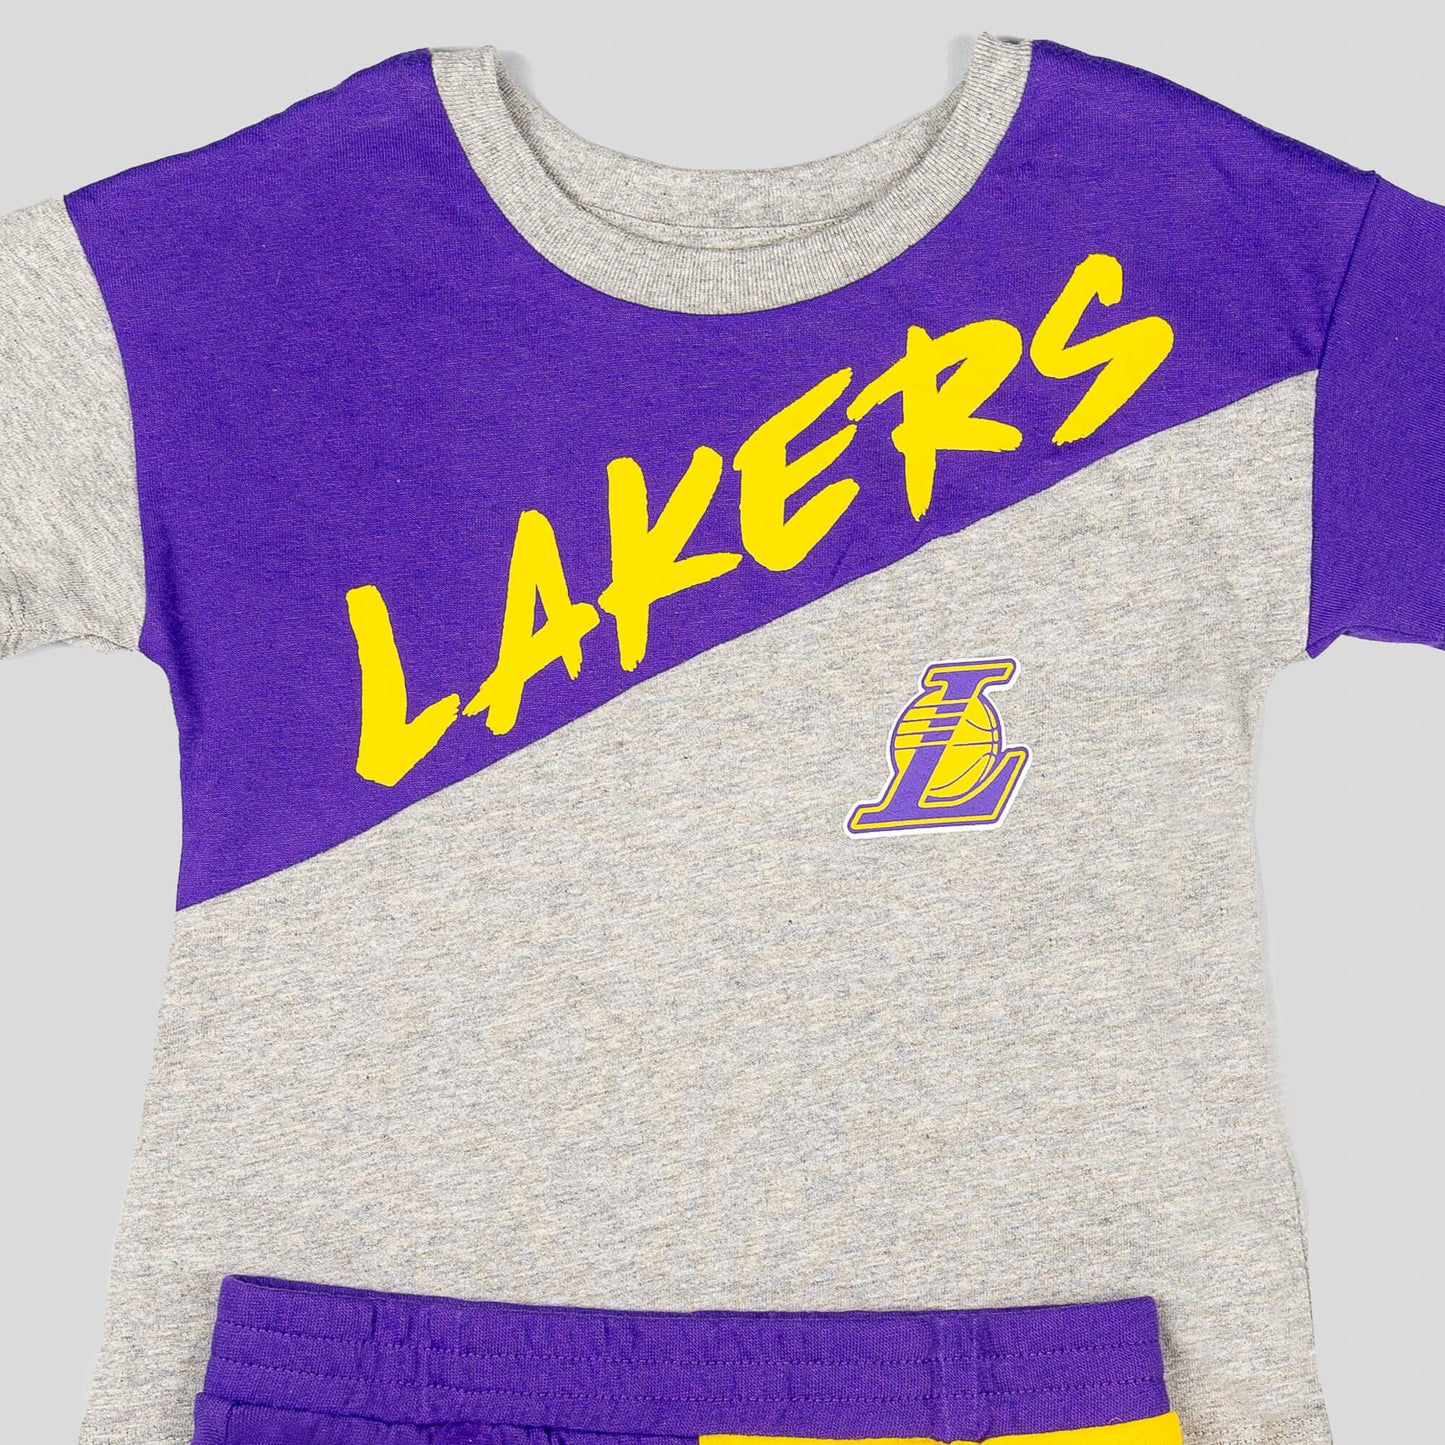 Outer Stuff Super Star Short Set Los Angeles Lakers Grey